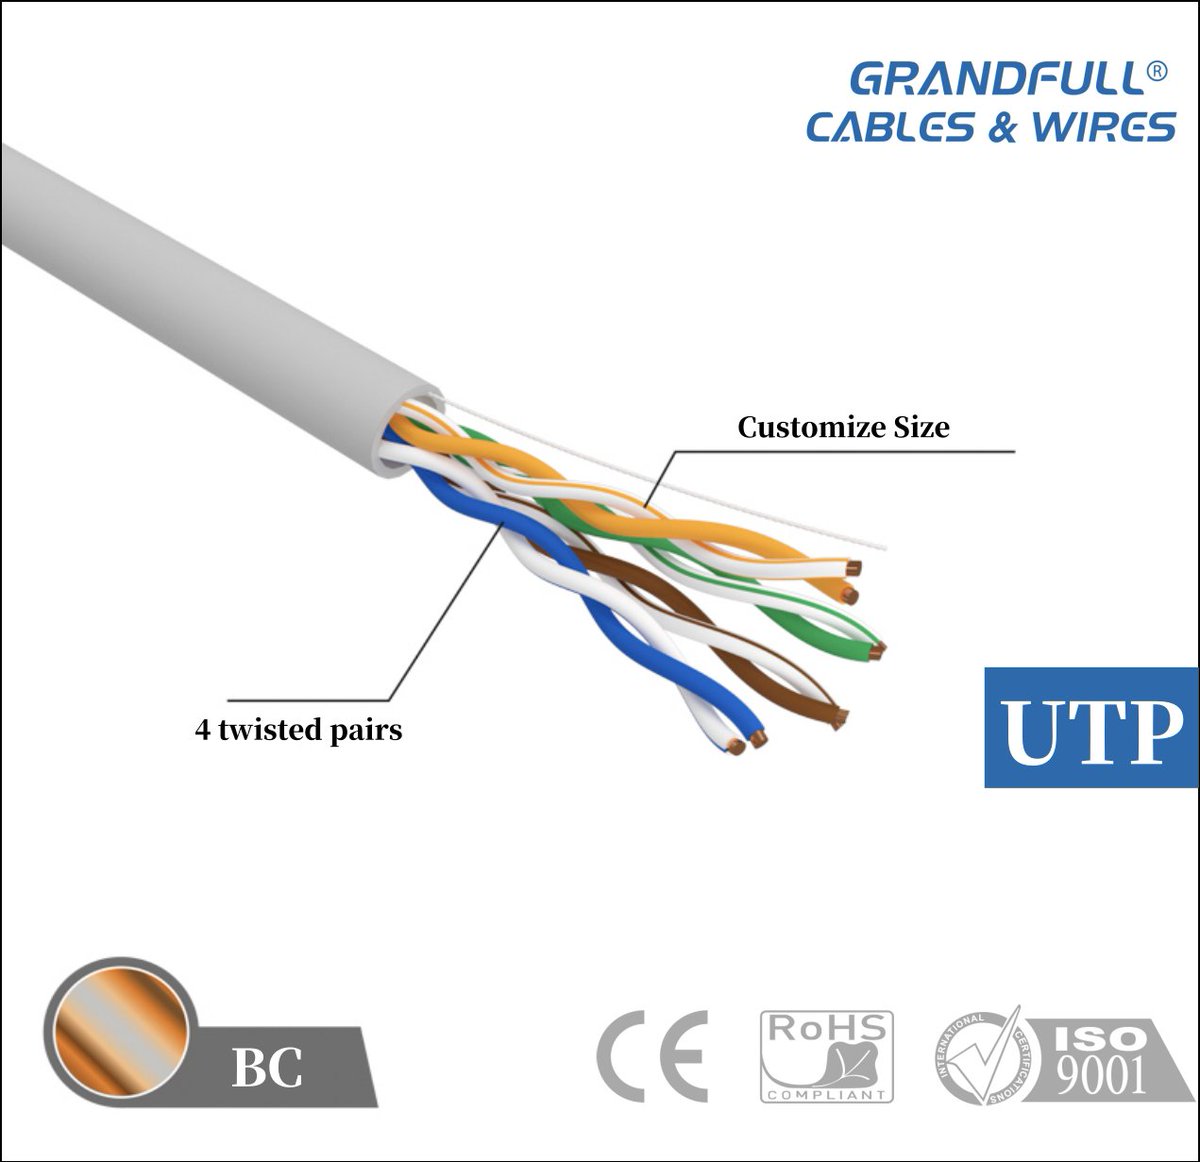 Grandfull Cable cat5e 4 twisted pairs Customize Size Available Customize Jacket Color Available Customize Packing Available Be your reliable supplier. 💪🏻 Web：www.grandfullcable. com Email: manage@forcan.com #cat5 #cat6 #cat6a #cat7 #cable #network #computer #datacenter